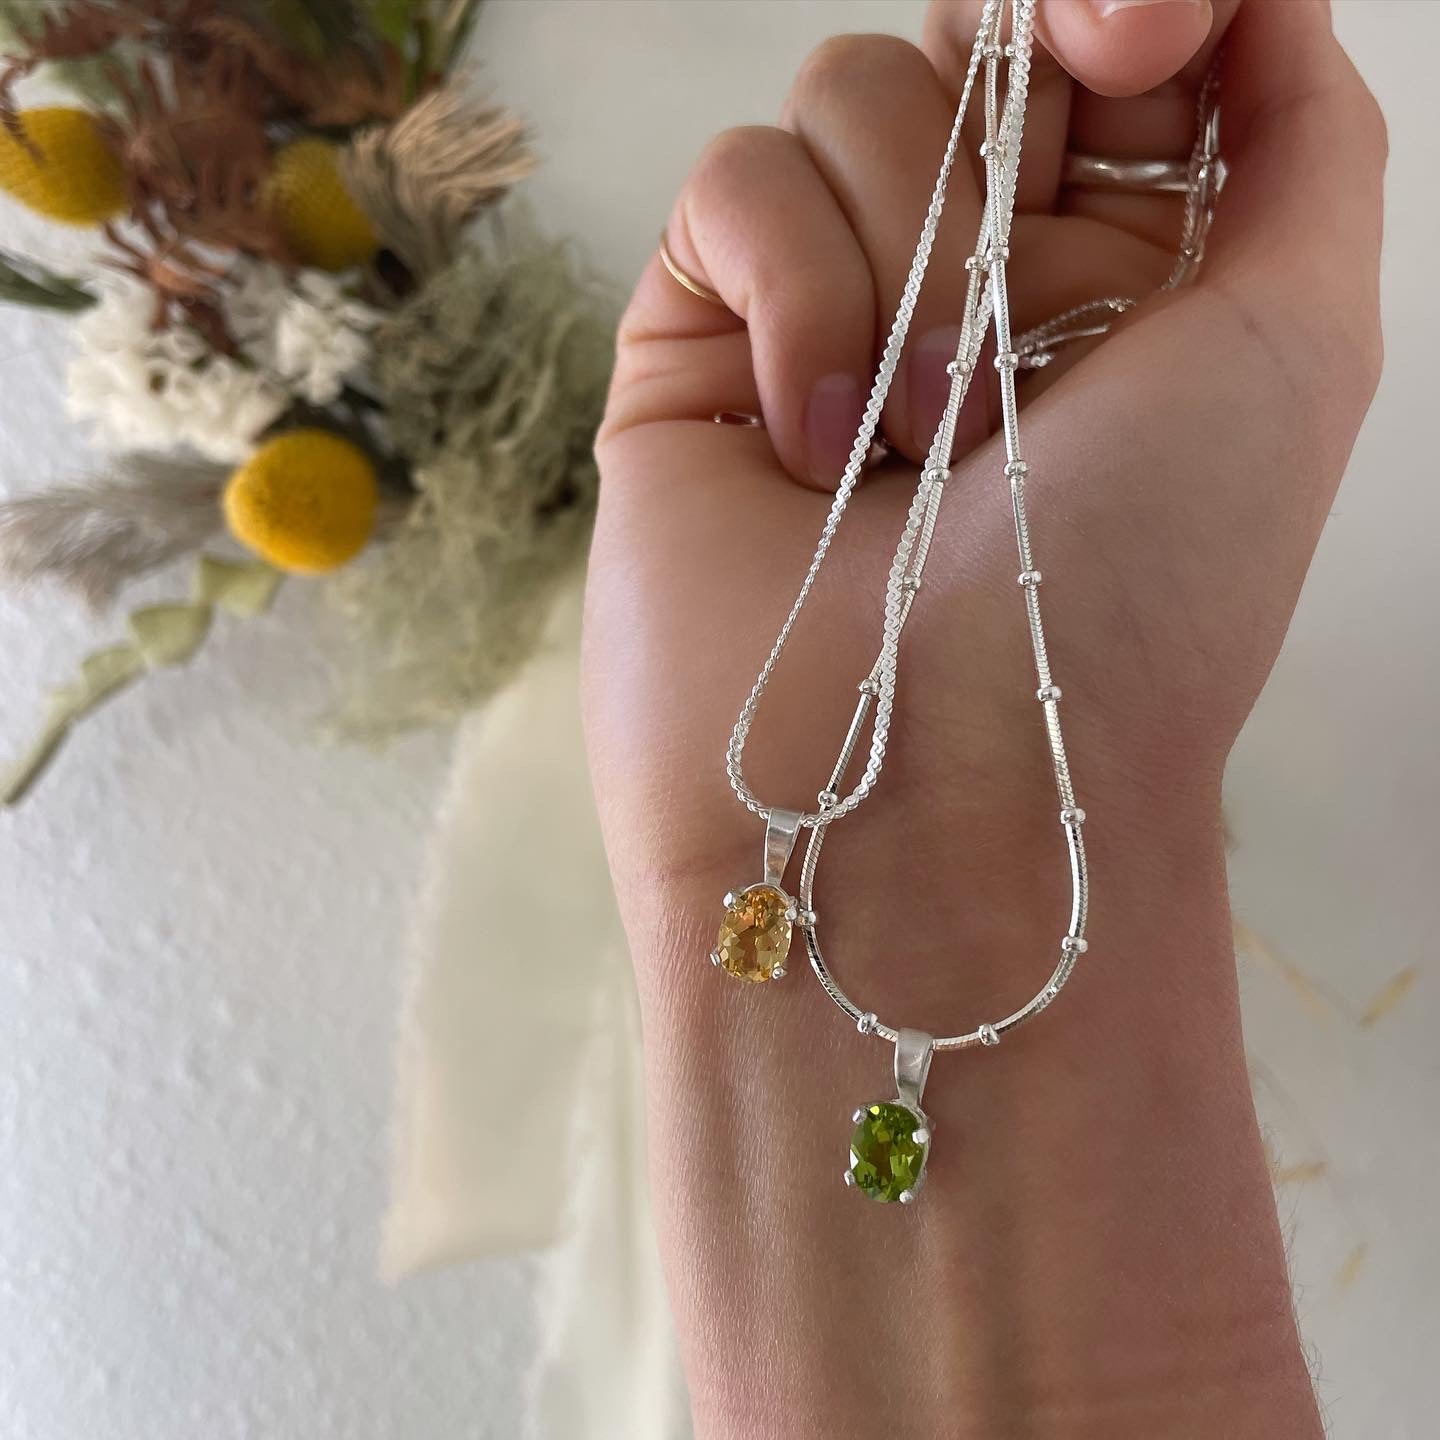 Oval Faceted Peridot Necklace